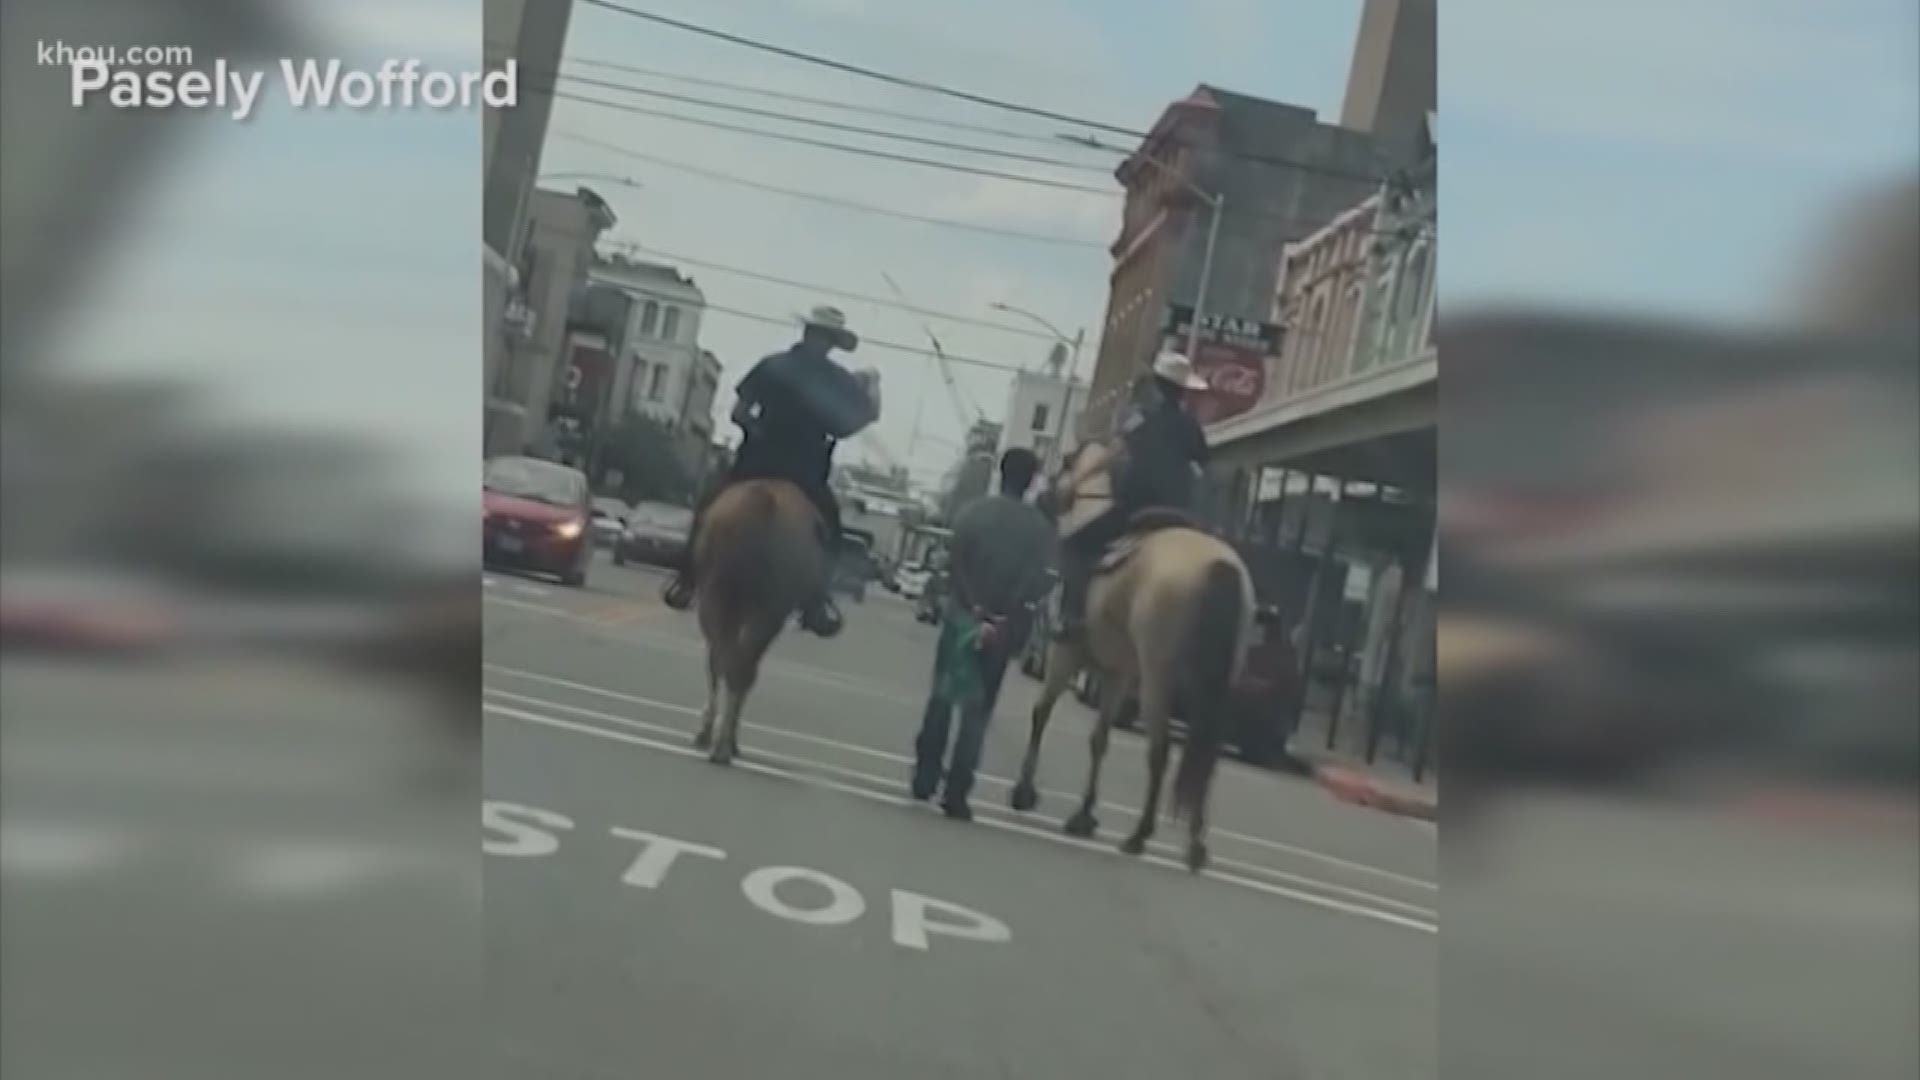 The Texas Rangers said Friday there will be no criminal investigation into the arrest of a man who was tied to a rope by mounted officers in Galveston earlier this month. Donald Neely's Aug. 3 arrest garnered attention across the county, as he was seen attached to a line and walking down a street between two mounted officers' horses.